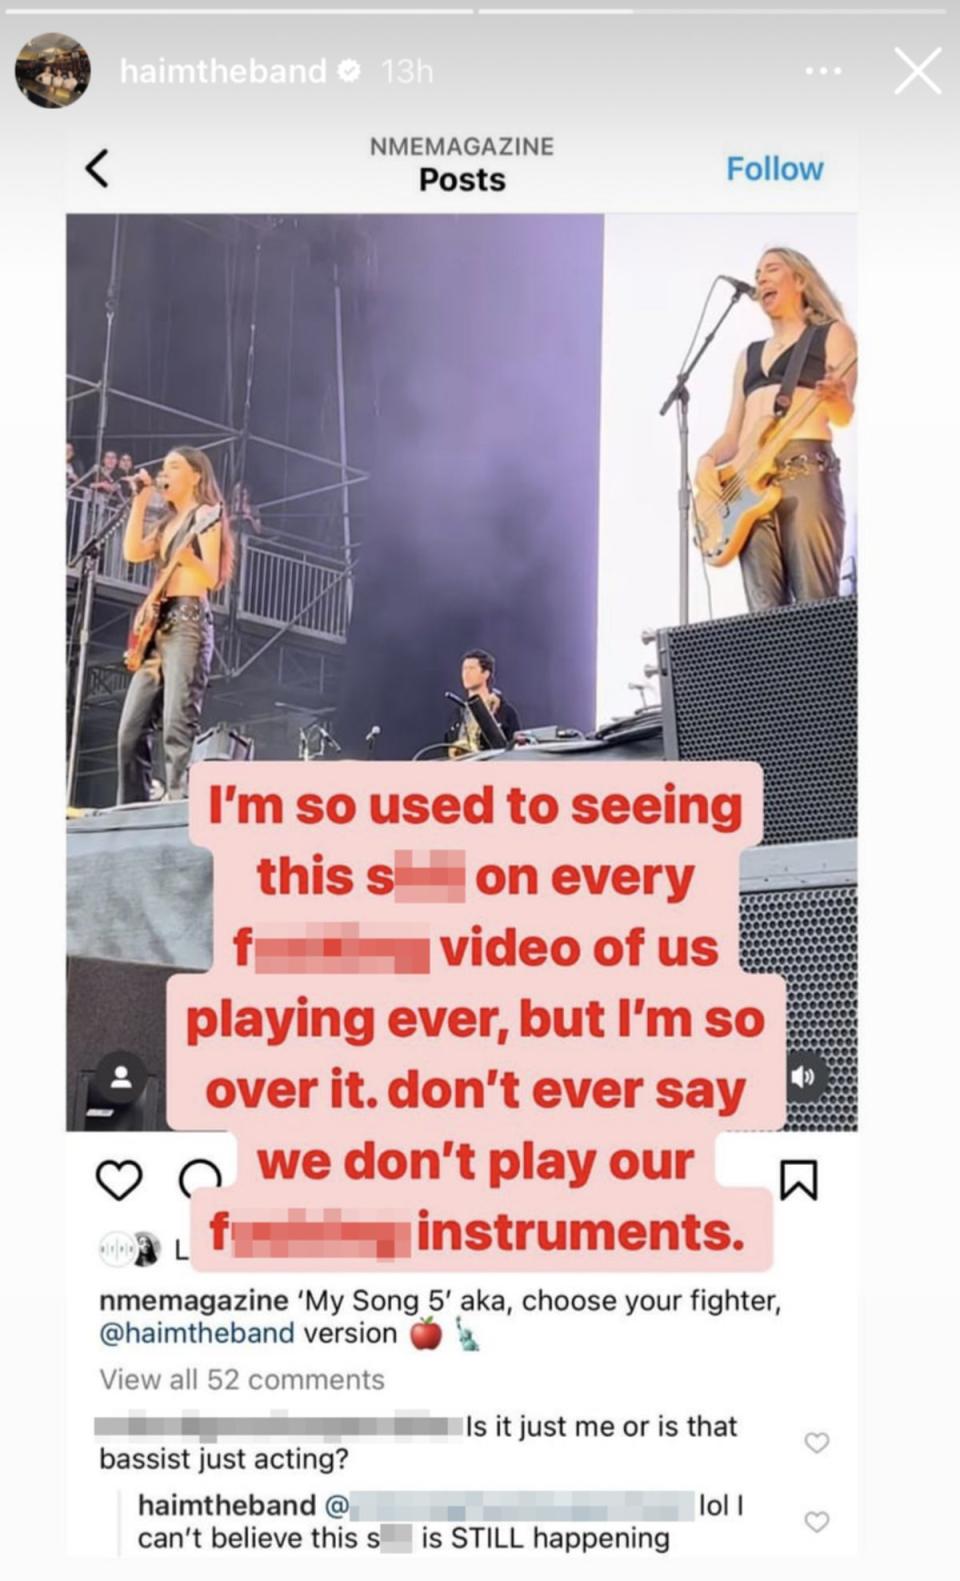 Haim shares disapproval over message that questions their instrument playing (Instagram / Haim)